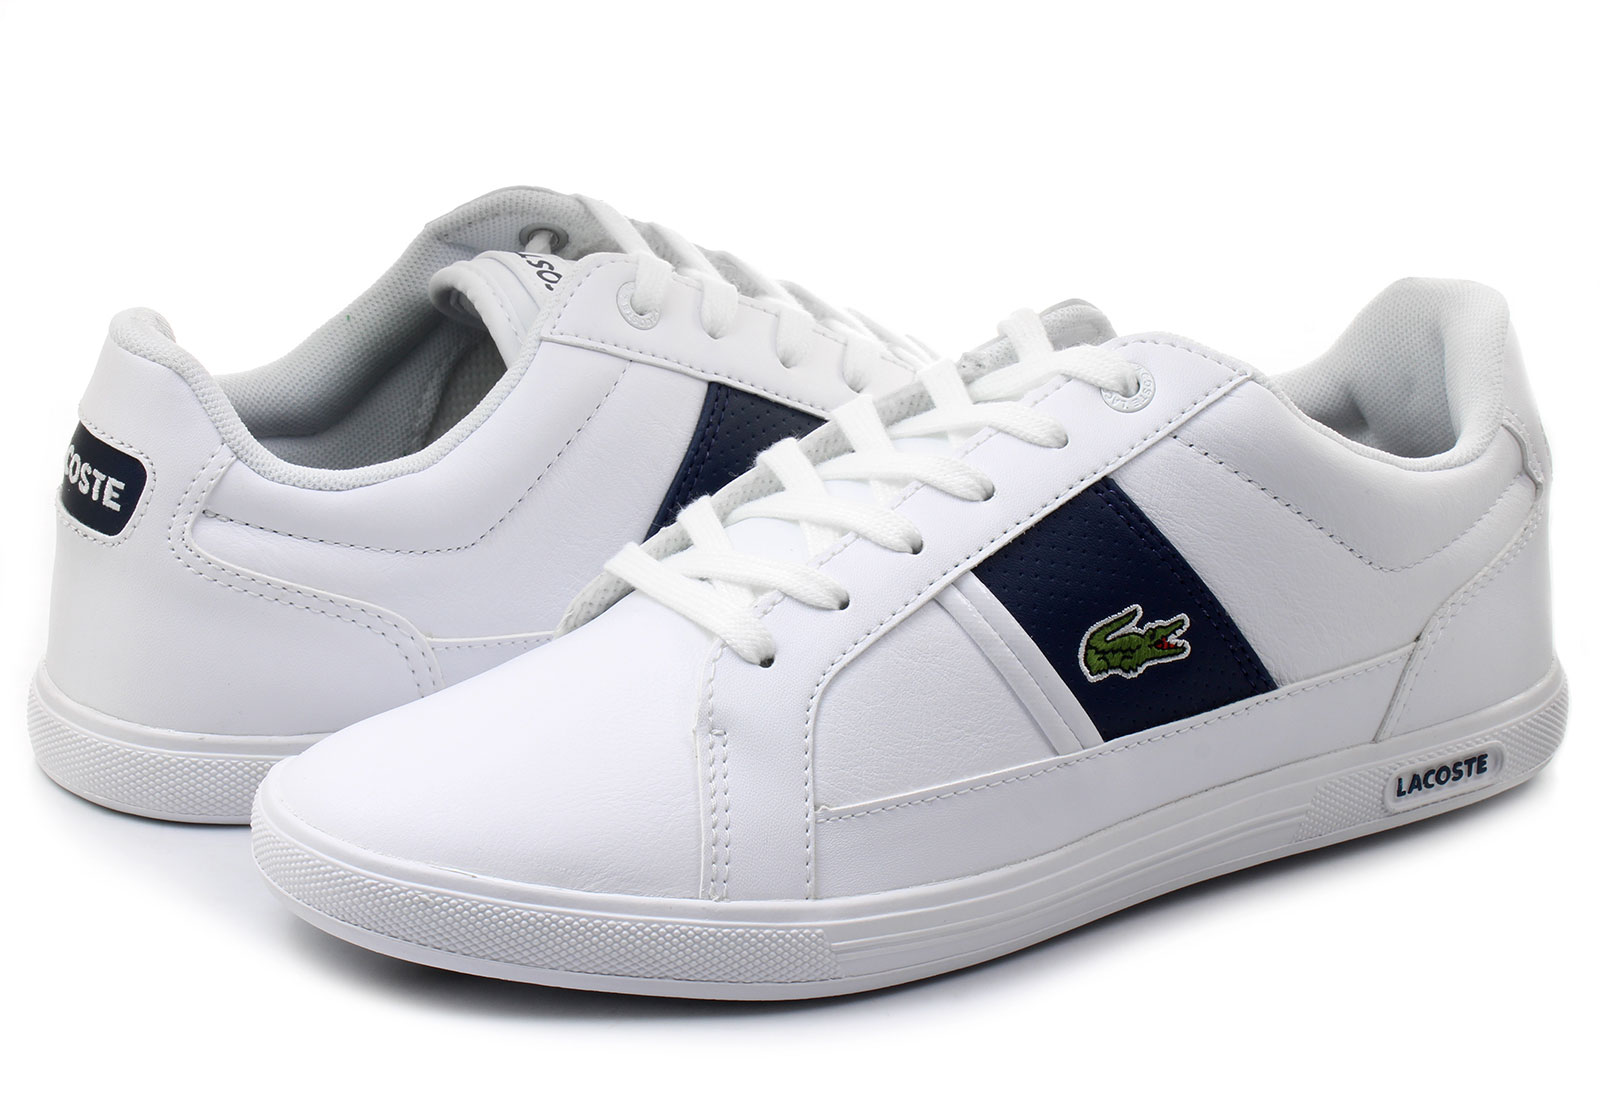 Lacoste Shoes - Europa - 161spm0097-x96 - Online shop for sneakers ...